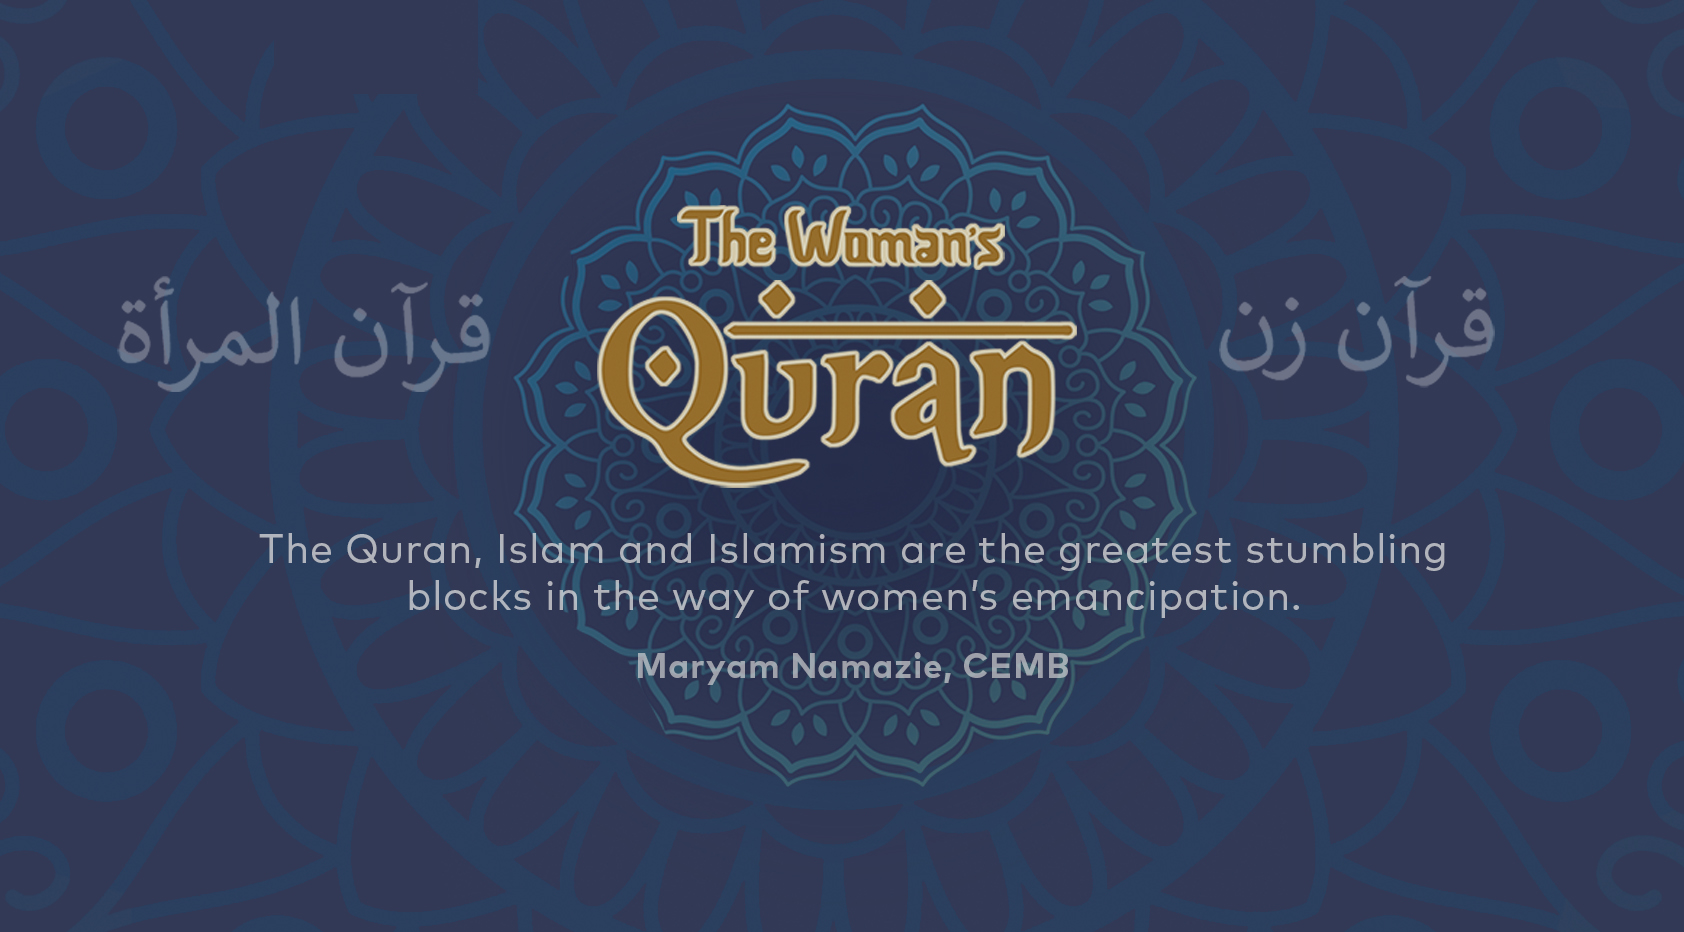 The Woman’s Quran